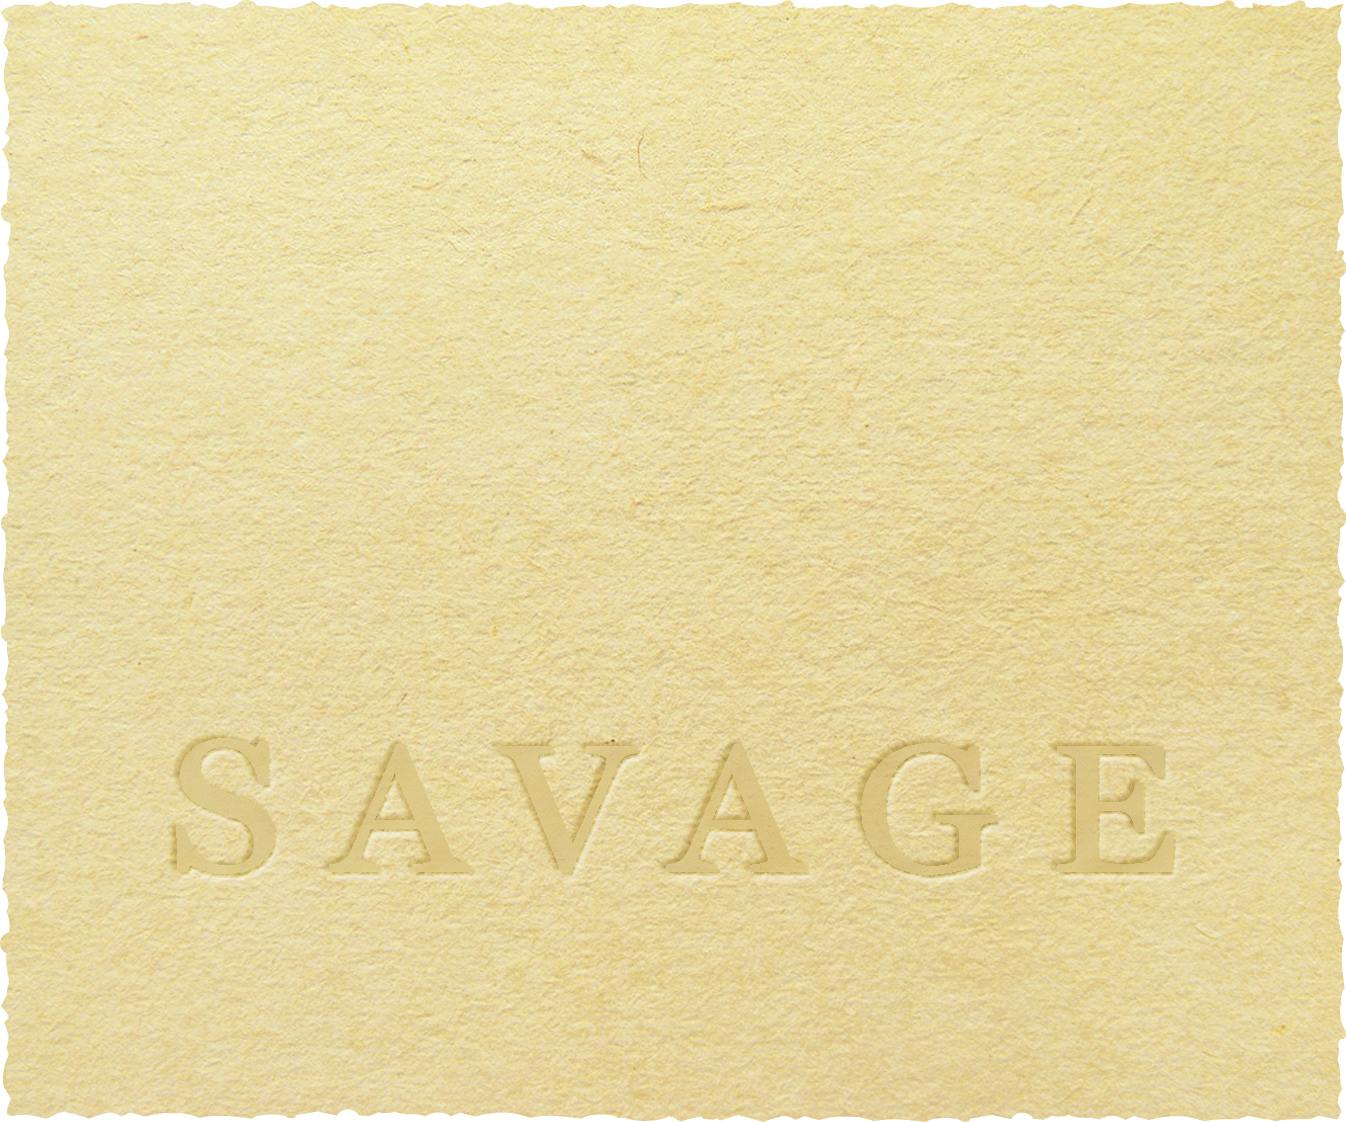 Label for Duncan Savage